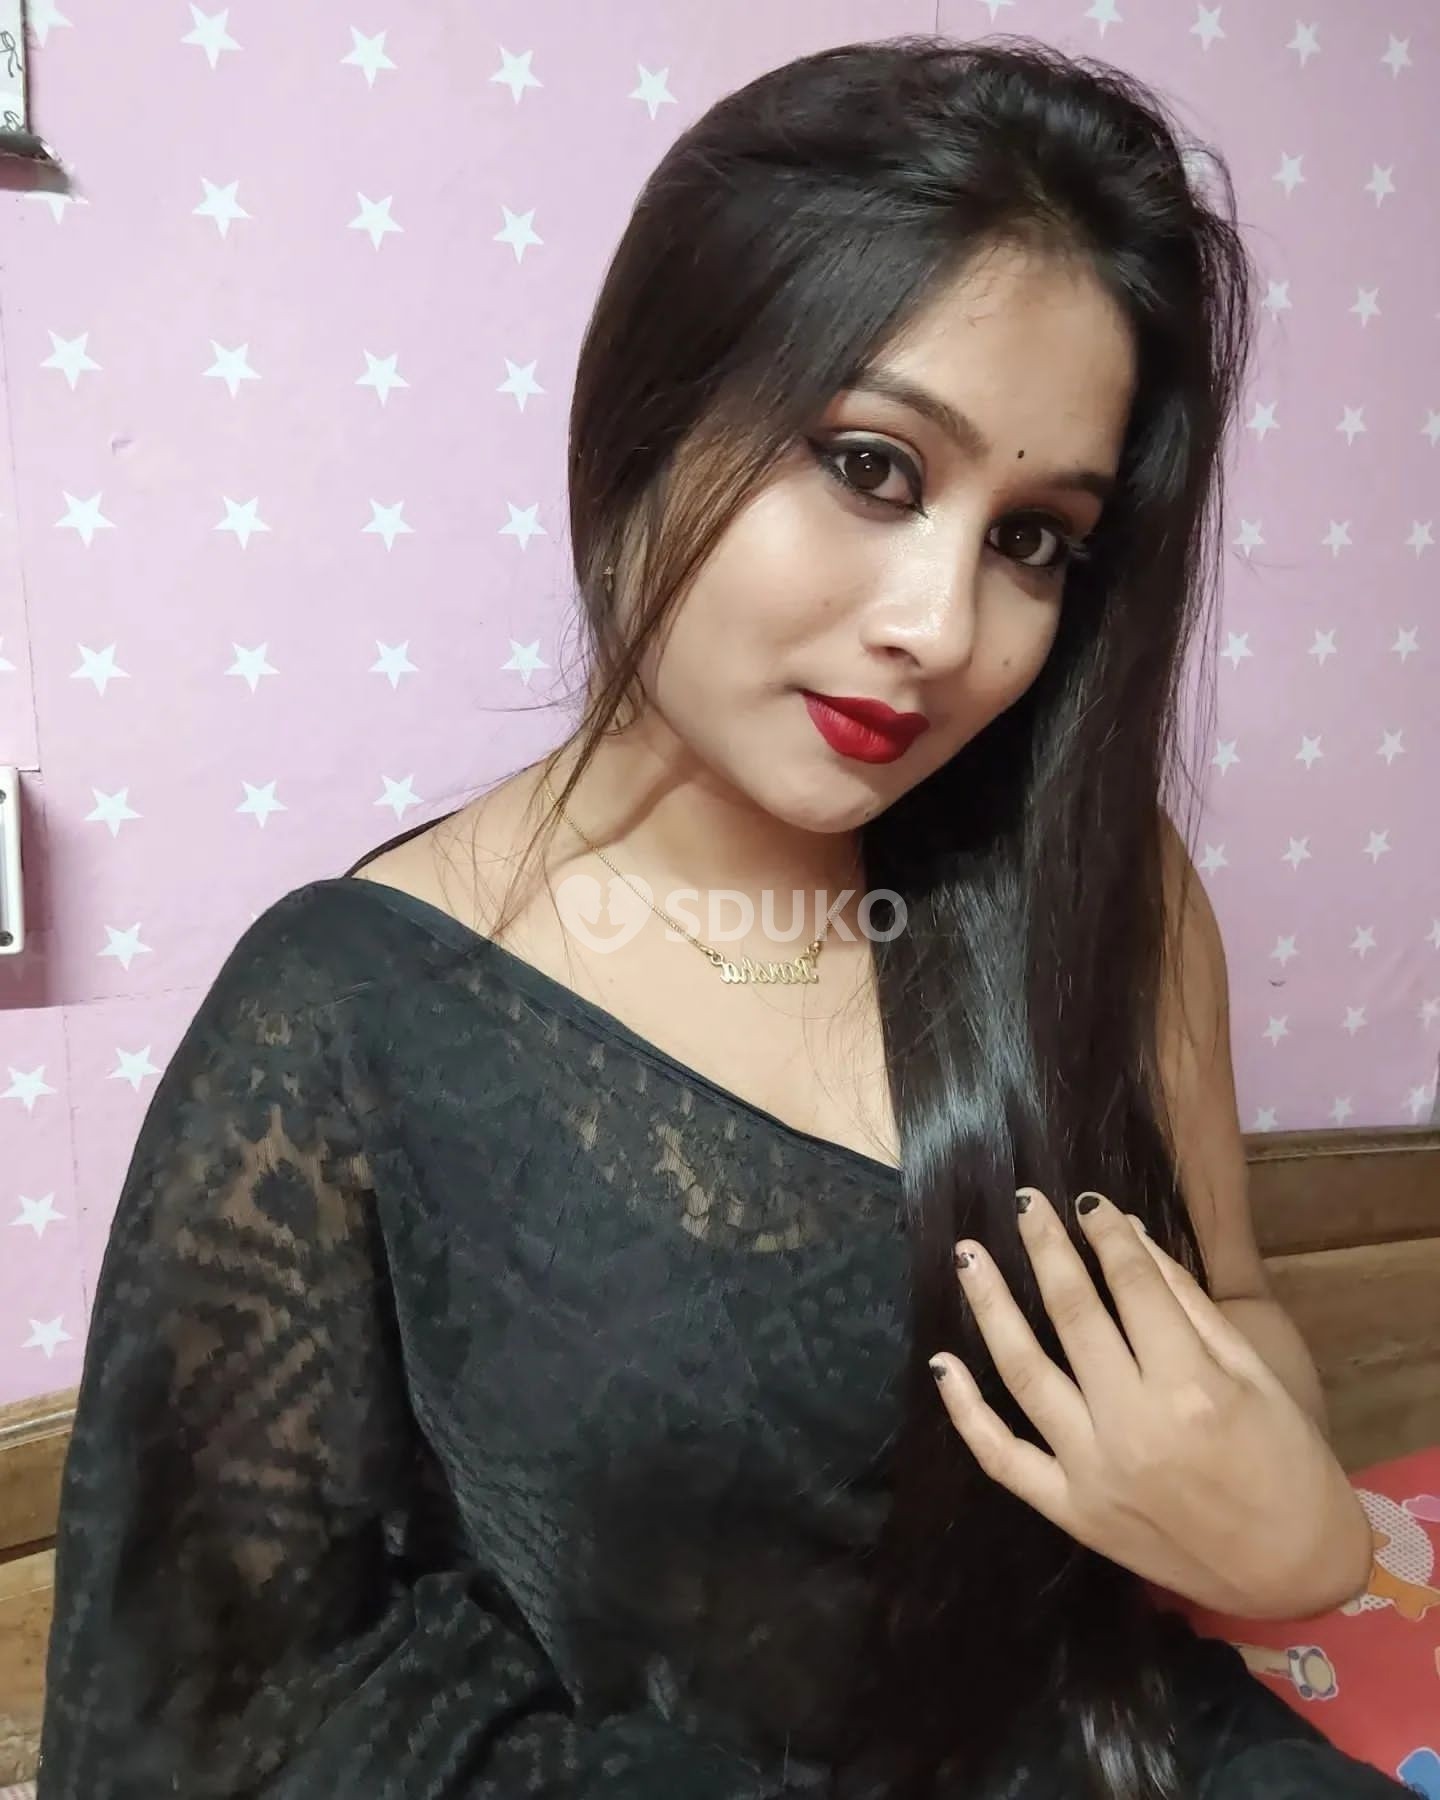 INDORE 💯TODAY LOW PRICE 100% SAFE AND SECURE GENUINE CALL GIRL AFFORDABLE PRICE CALL NOW 24/7